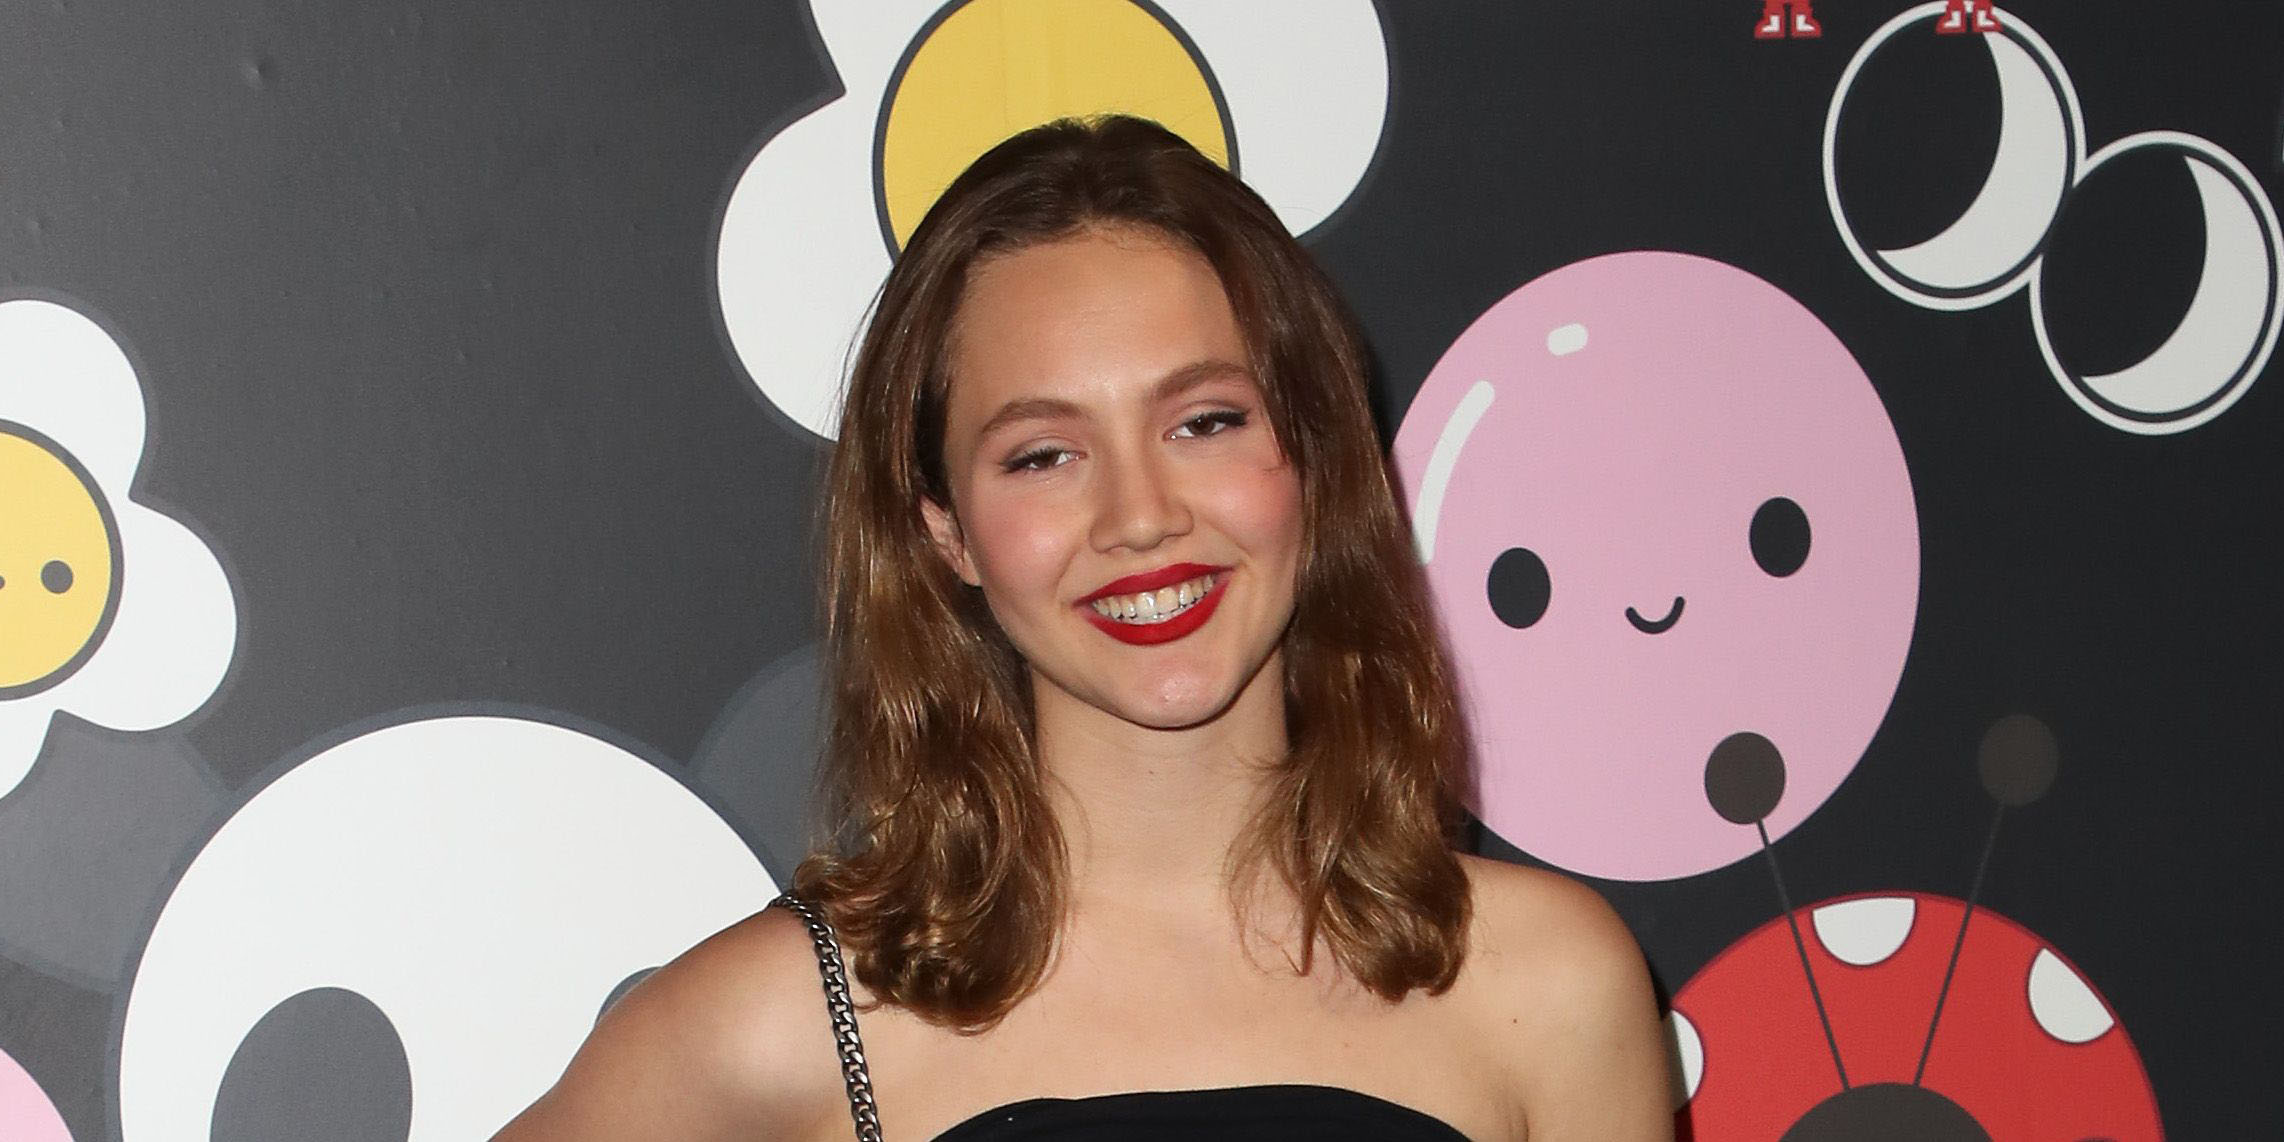 Iris Apatow (Model) Wiki, Biography, Age, Boyfriend, Family, Facts and More